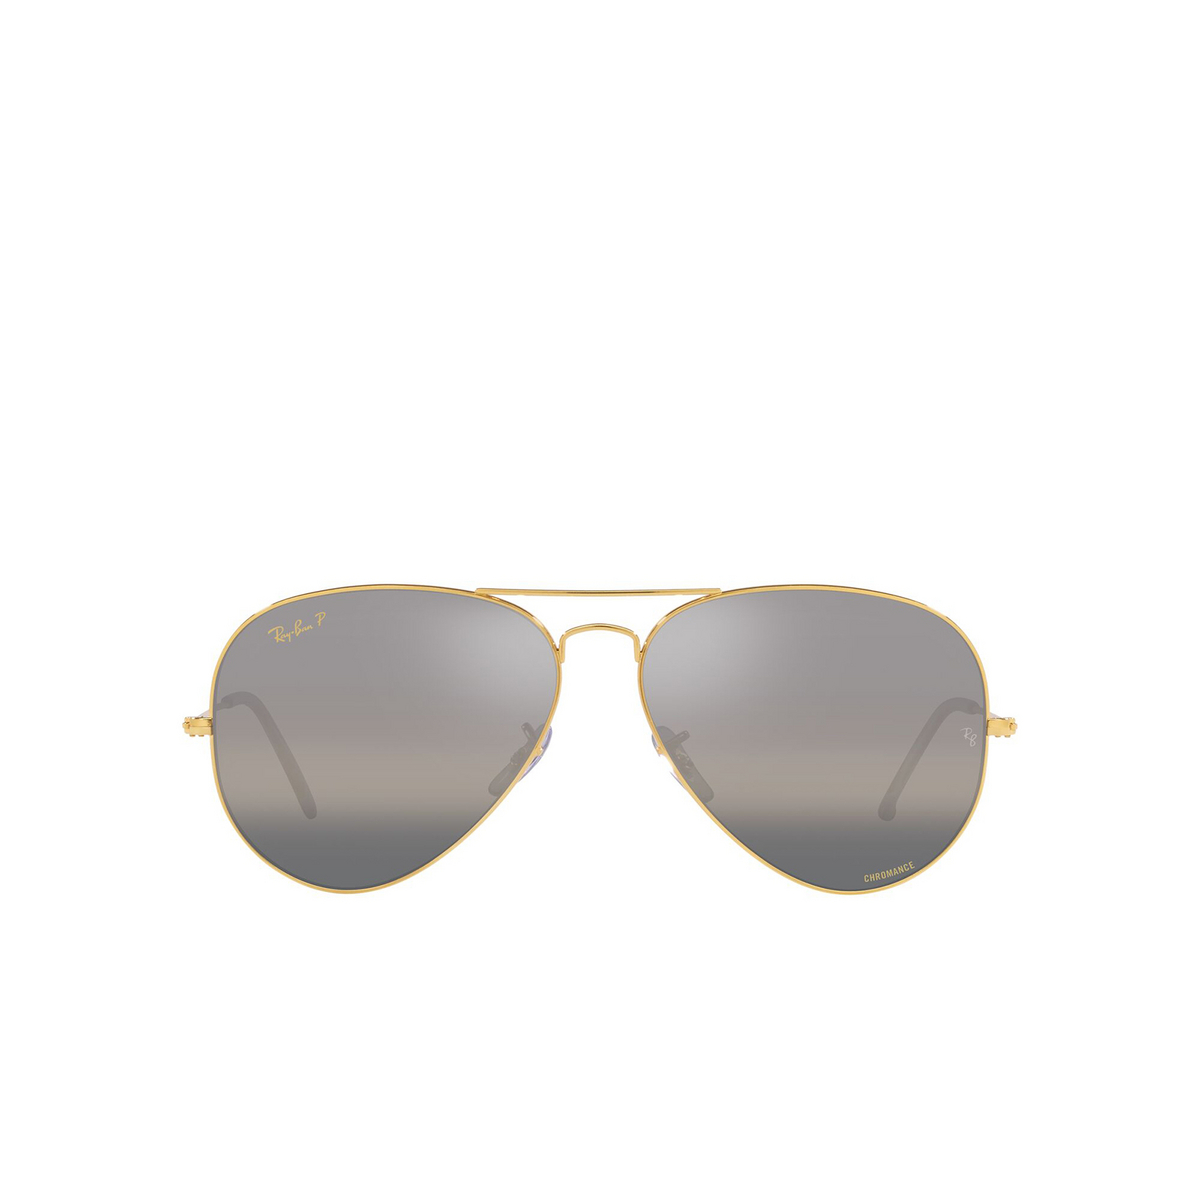 Ray-Ban AVIATOR LARGE METAL Sunglasses 9196G3 Legend Gold - front view